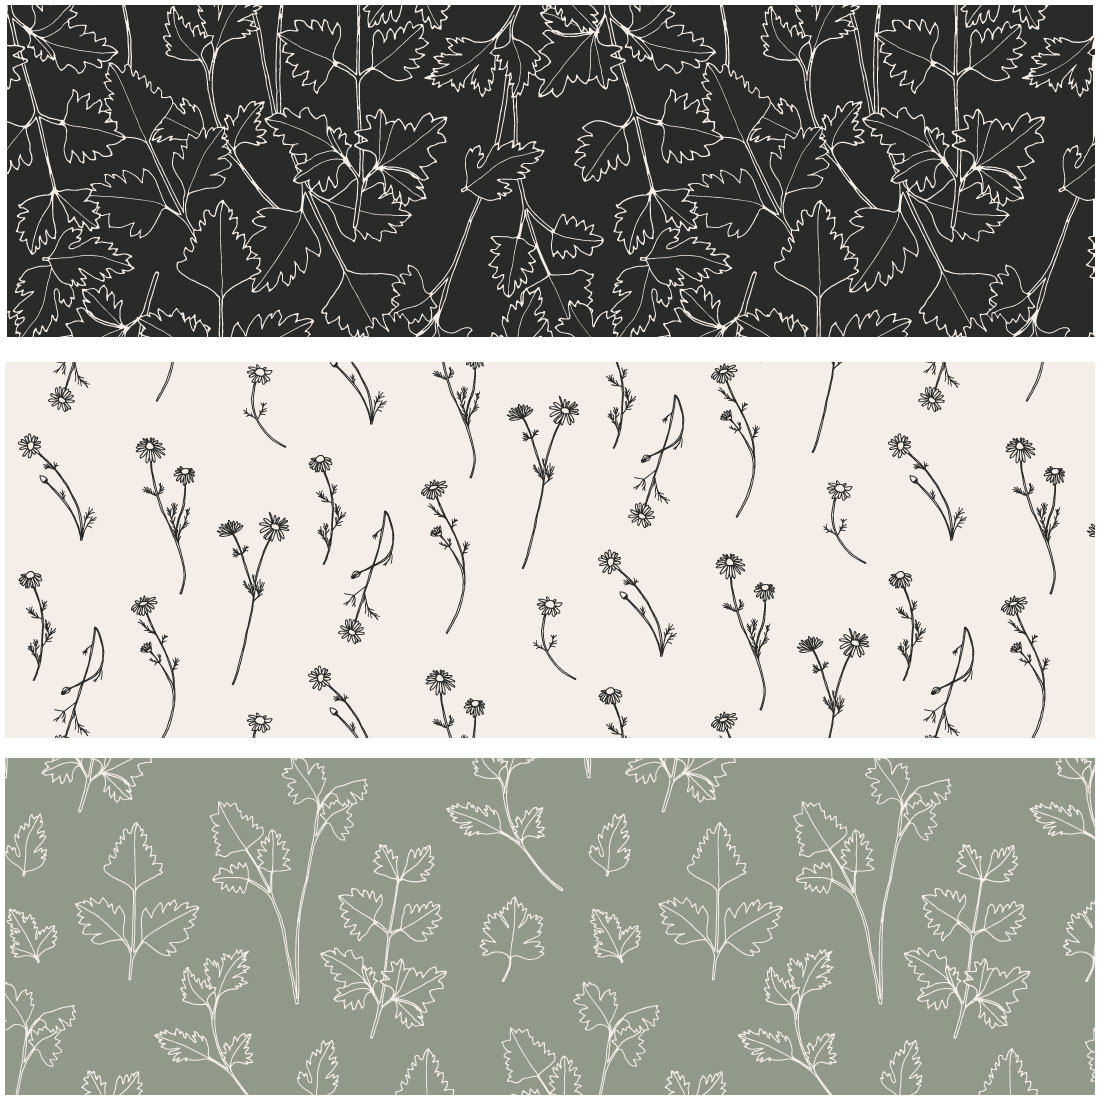 Herbs Patterns Illustrations preview image.